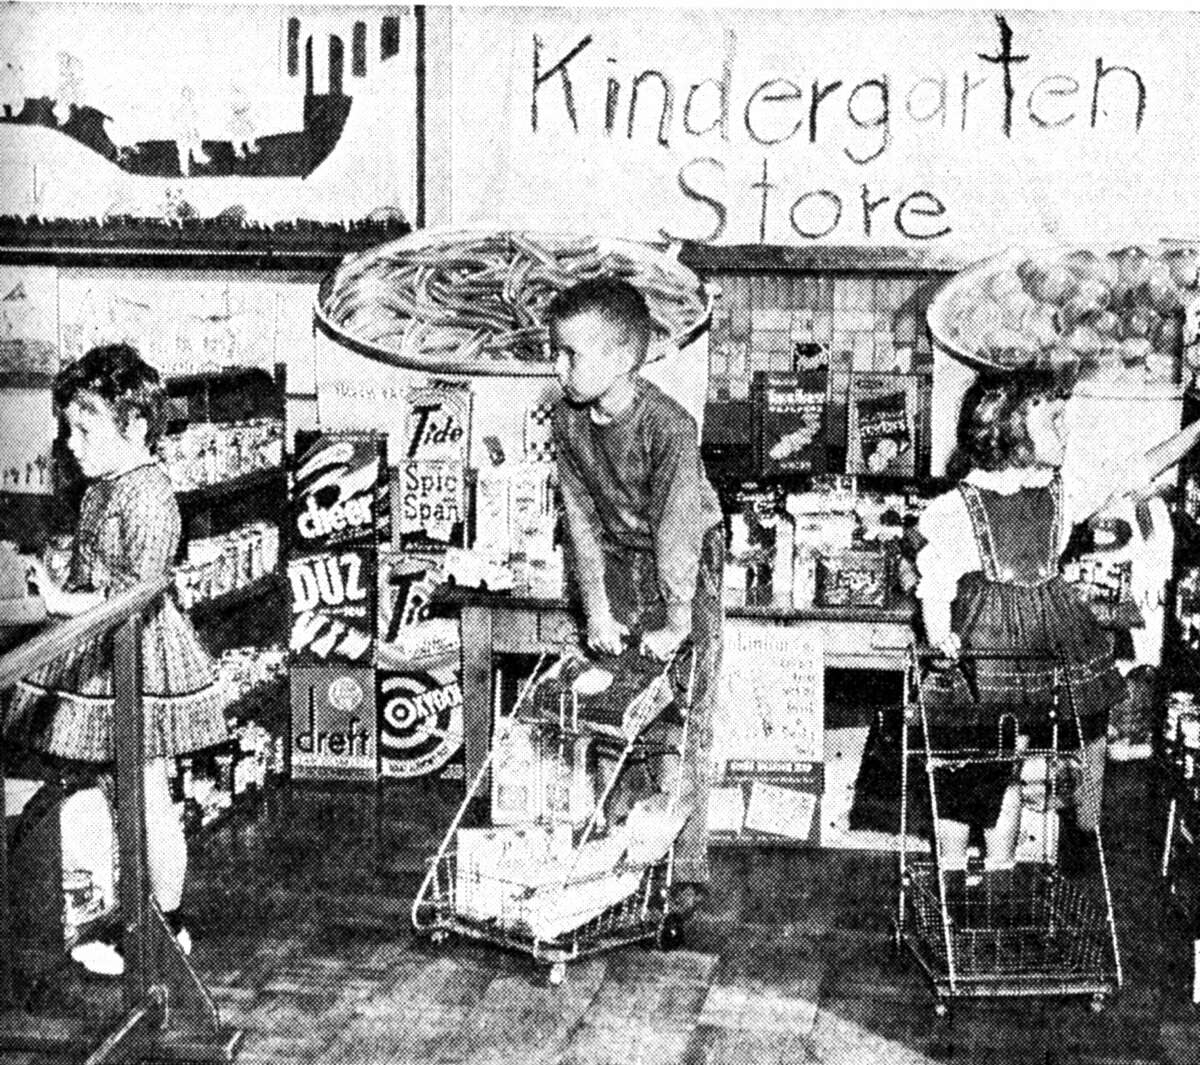 Through the efforts of Kay Claypool who wrote to various companies for the products, the Washington School kindergarten class has a model grocery store with real merchandise. The students gain experience and knowledge in choosing products, stocking shelves, making change and at the same time having a good time playing store. (From left) Susie Cooper, David Johnson and Shanon Howe are shown in this photo that published in the News Advocate on April 25, 1962.